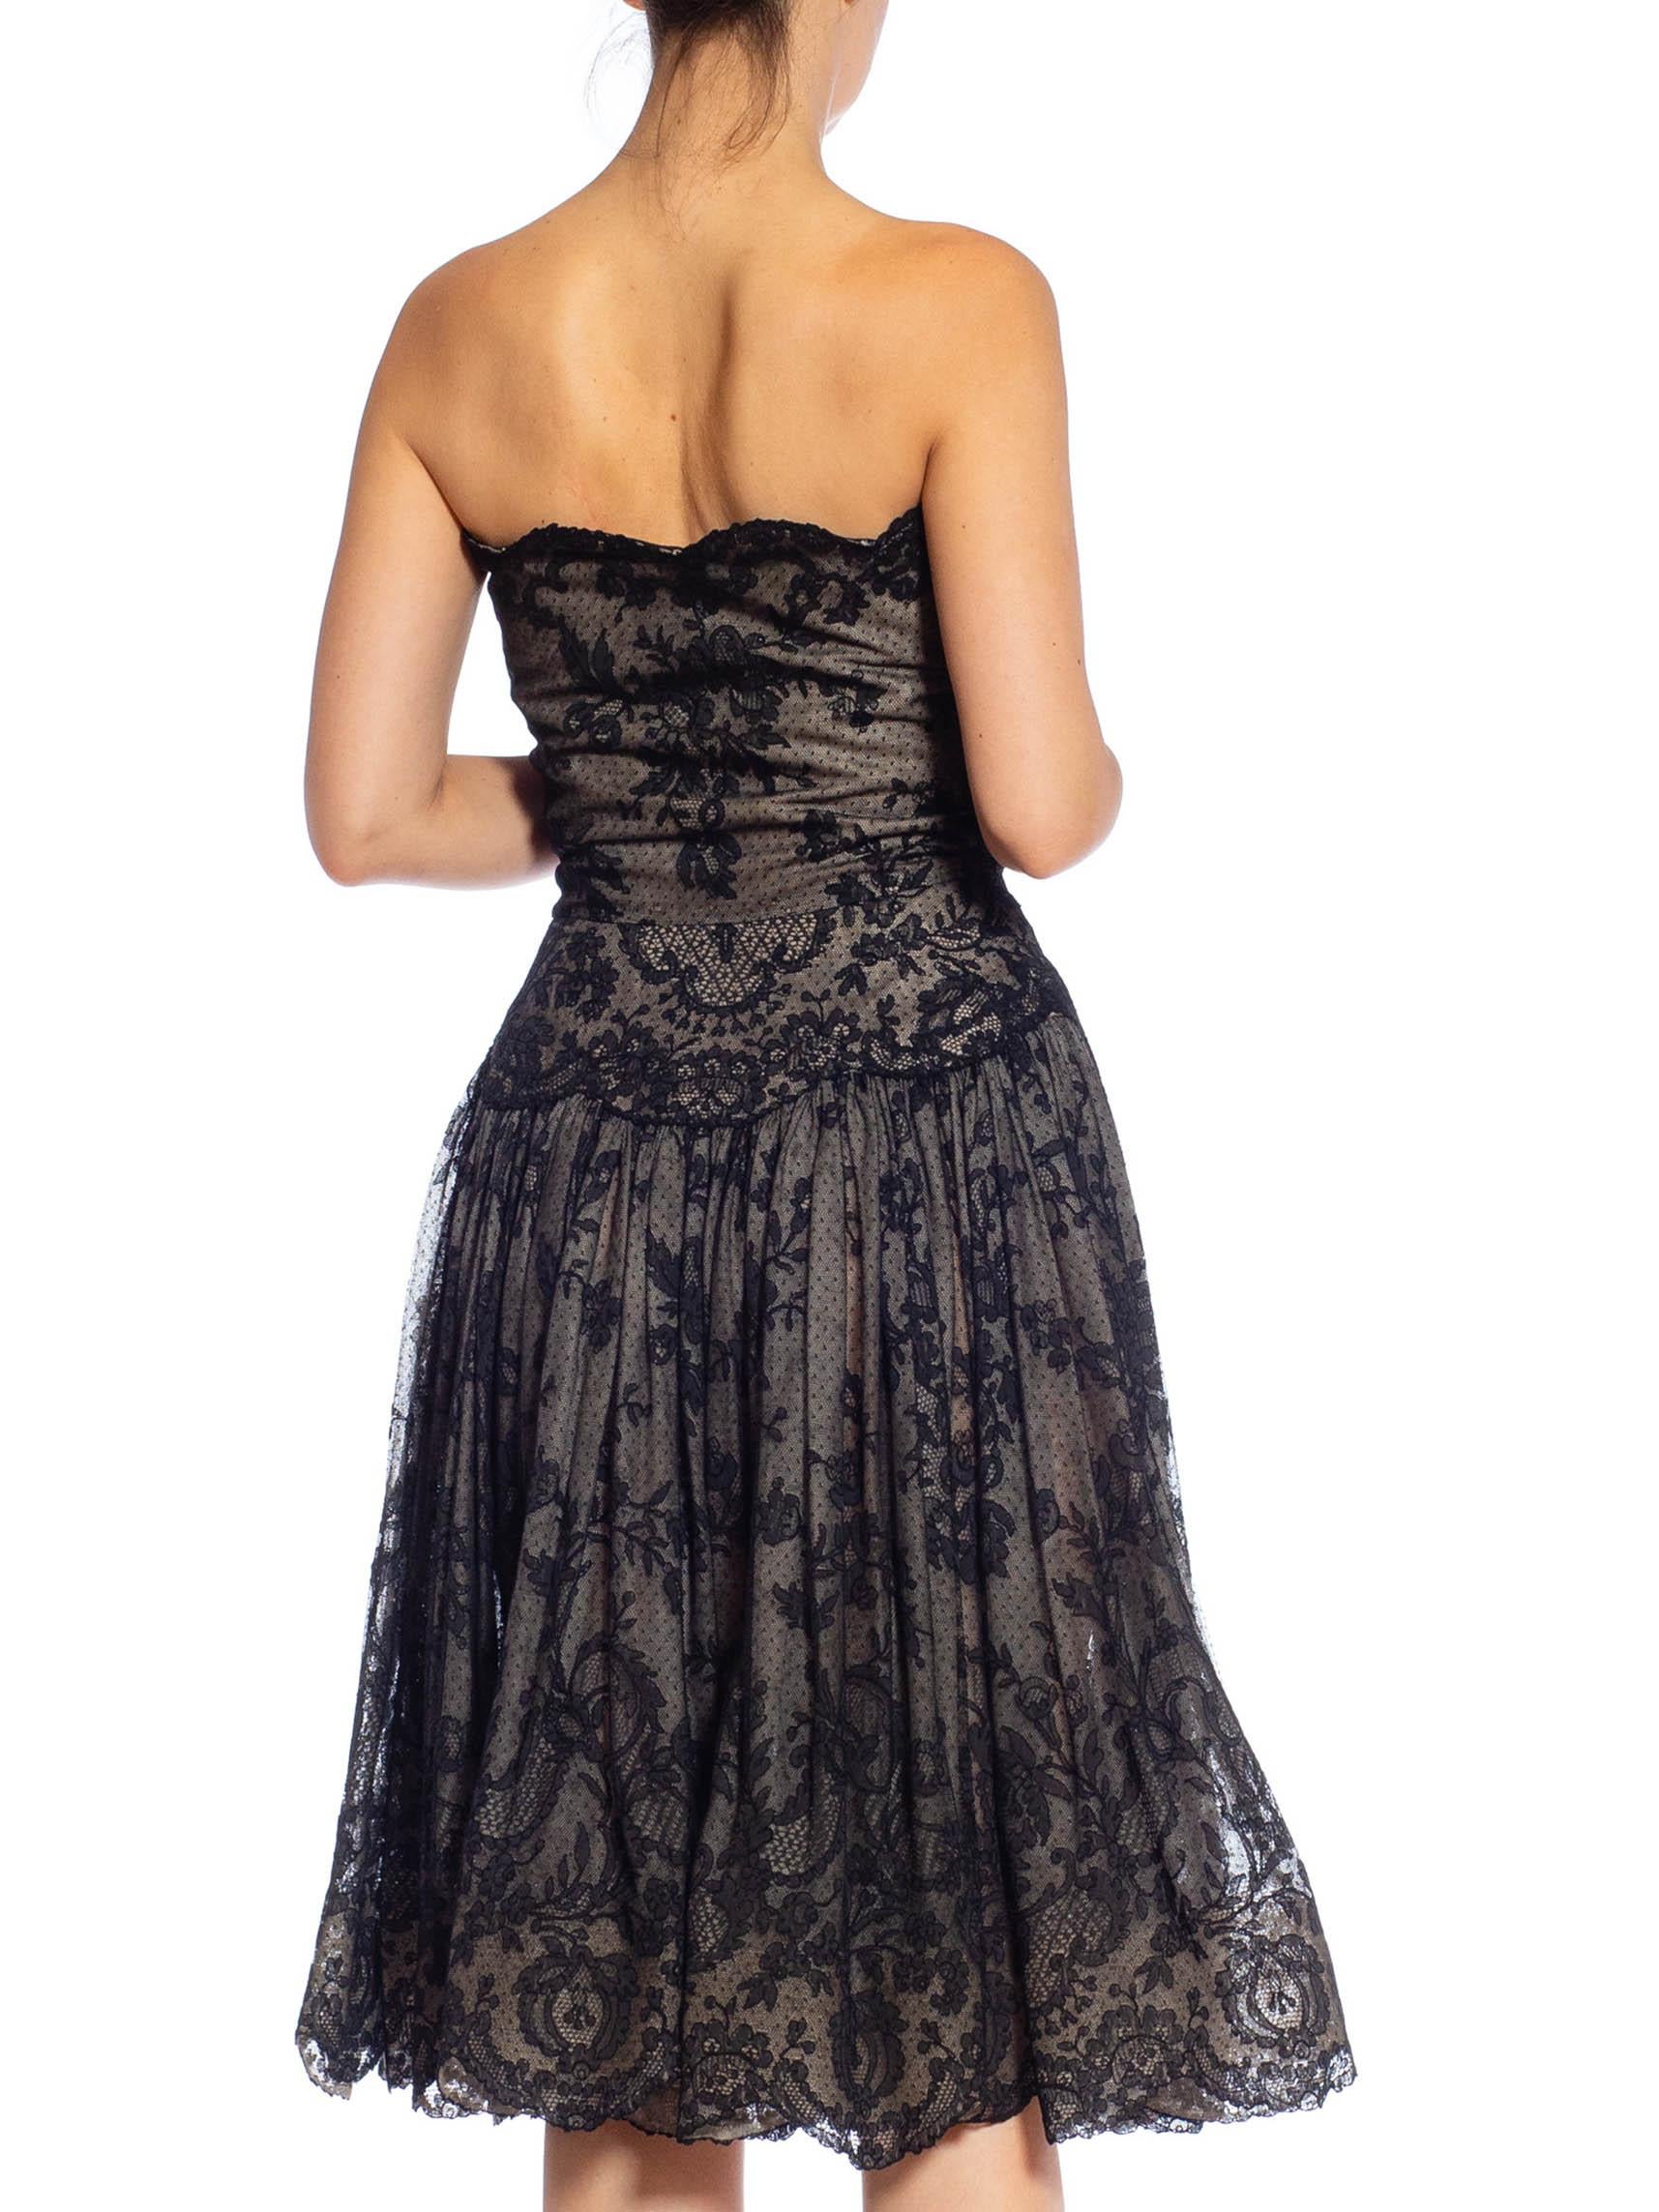 1950S Black Floral Lace Strapless Fit & Flare Cocktail Dress From Paris For Sale 3